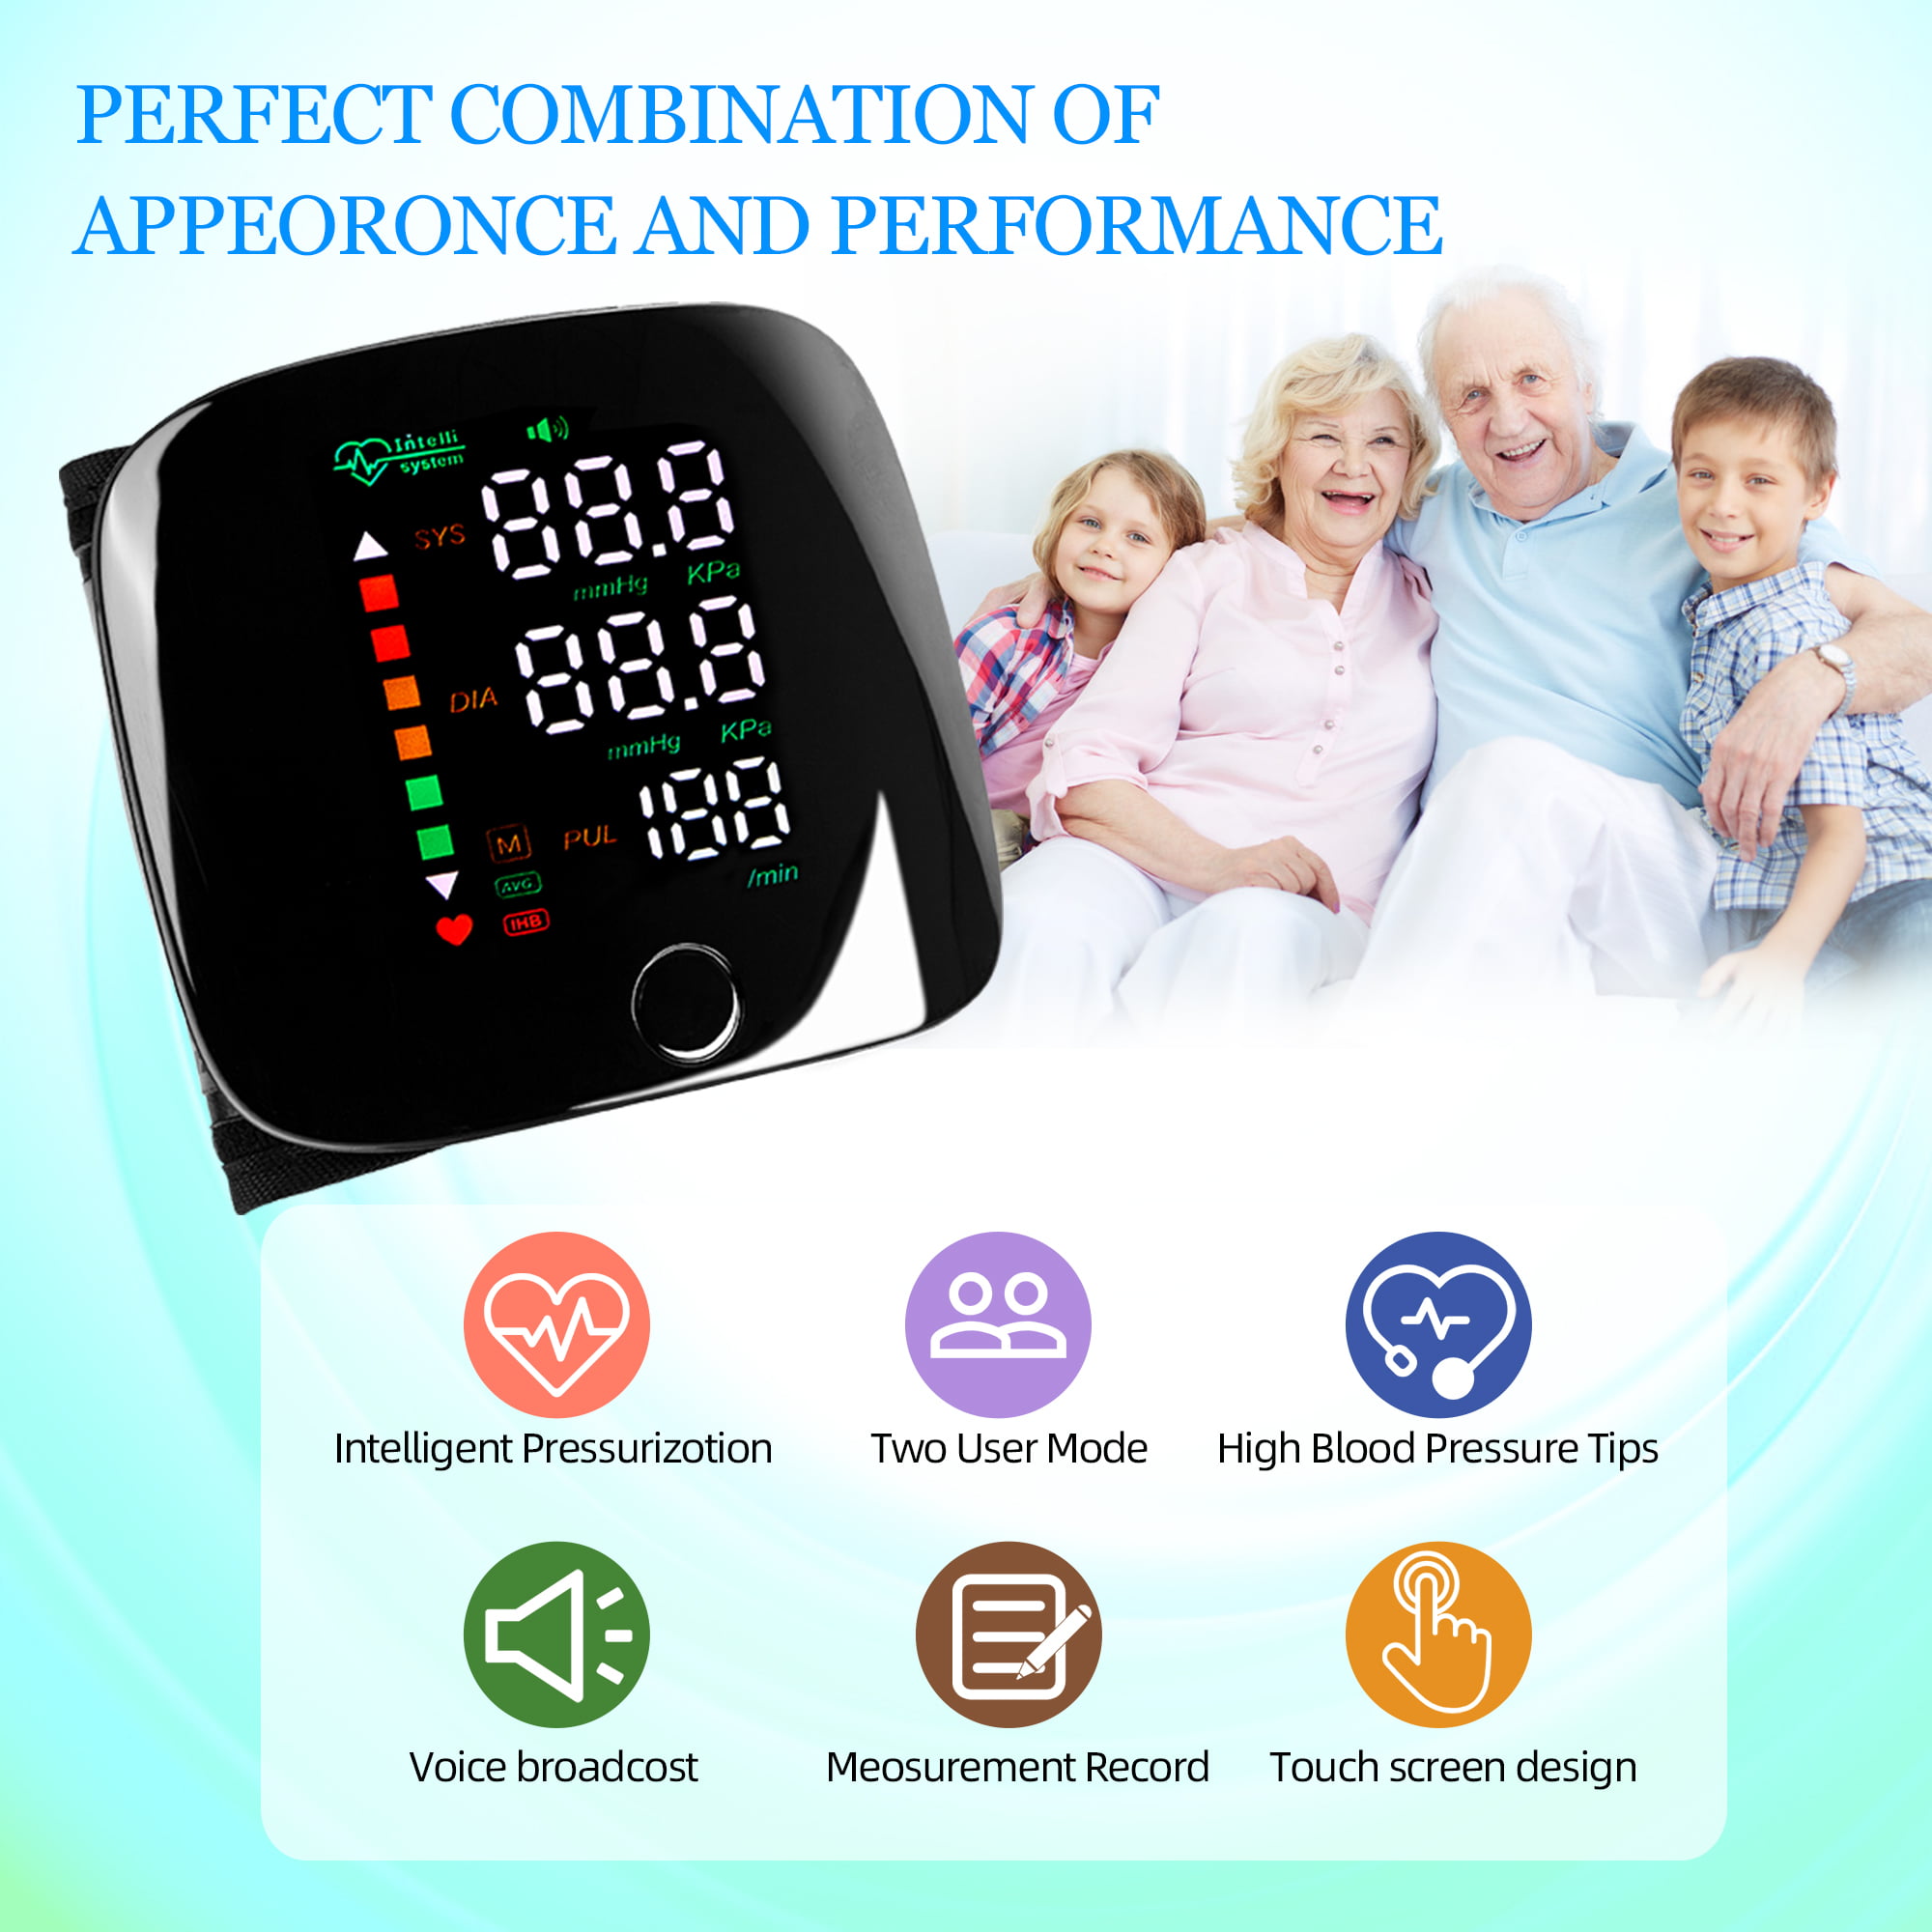 Wrist Blood Pressure Monitor Digital BP Monitor Rechargeable BP Machine  with 2x90 Readings Memory Large LCD Display Voice Broadcast Portable  Carrying Case, by Readytion